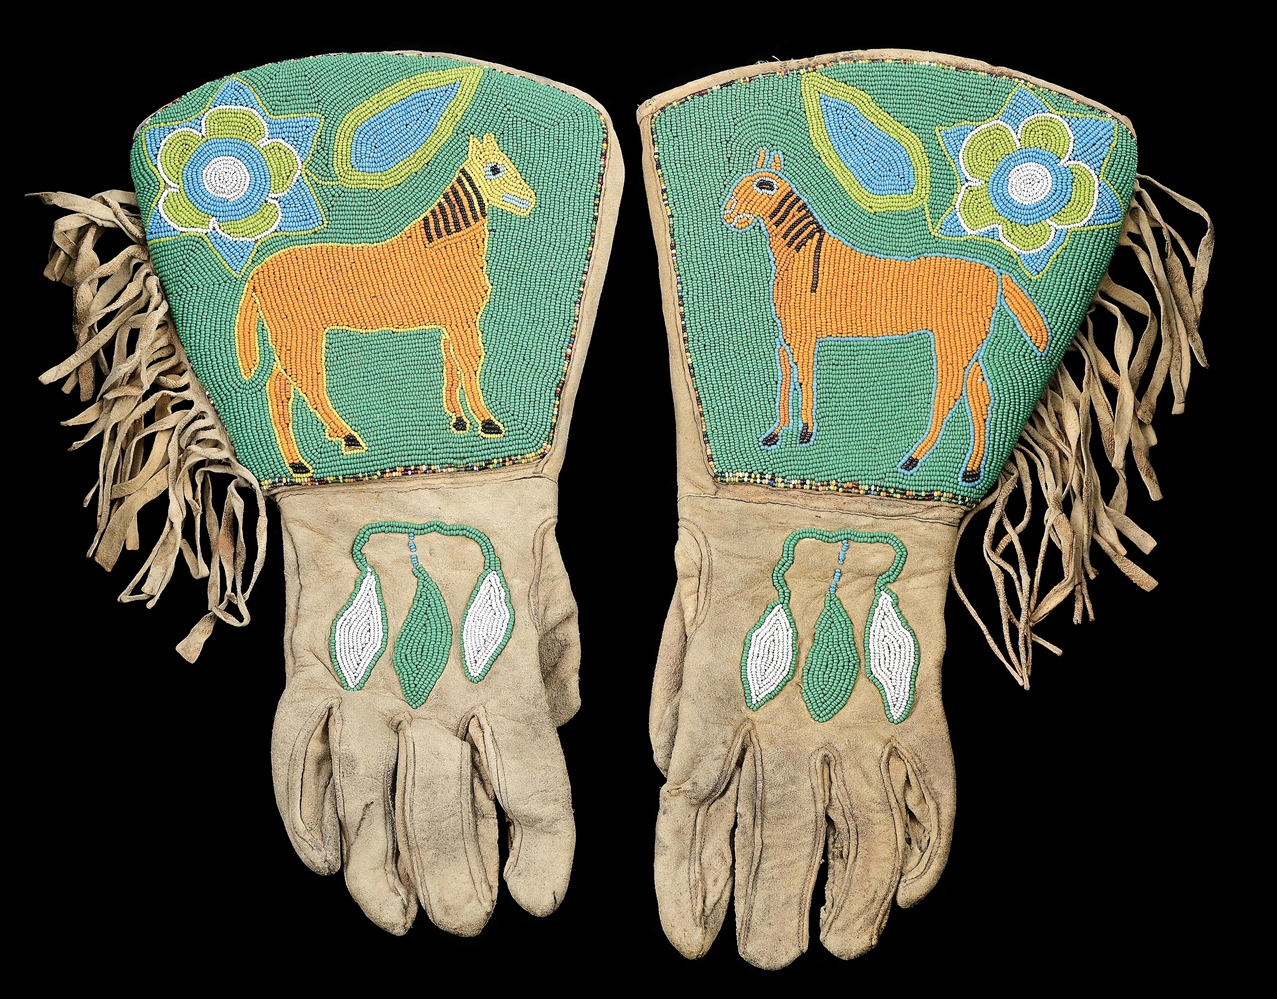 PLATEAU INDIAN BEADED GAUNTLETS. 